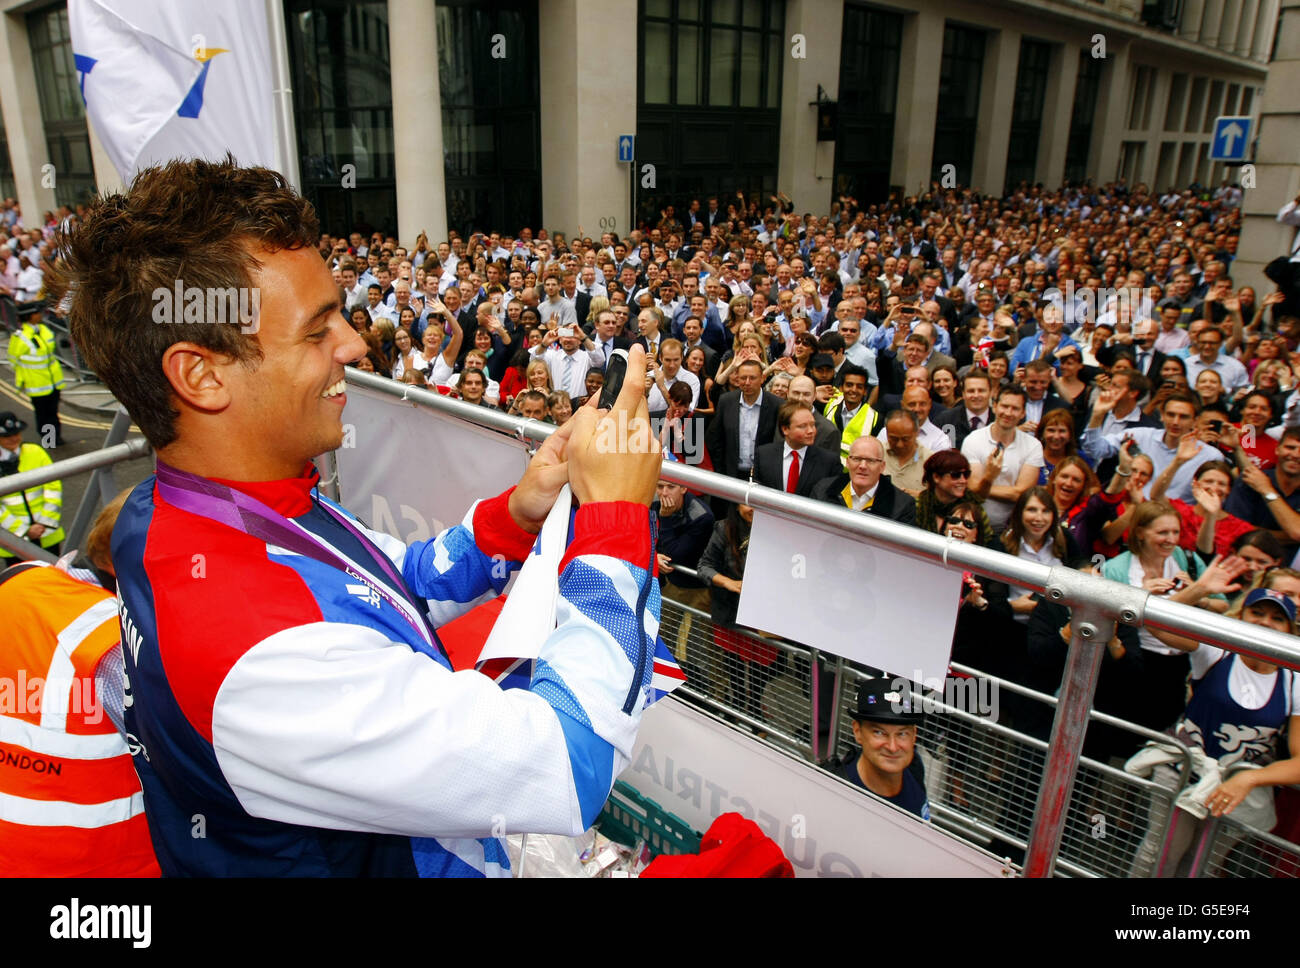 Diver Tom Daley films the crowd with his phone as he takes part in a parade through London, celebrating Britain's Olympic and Paralympic sporting heroes. Stock Photo